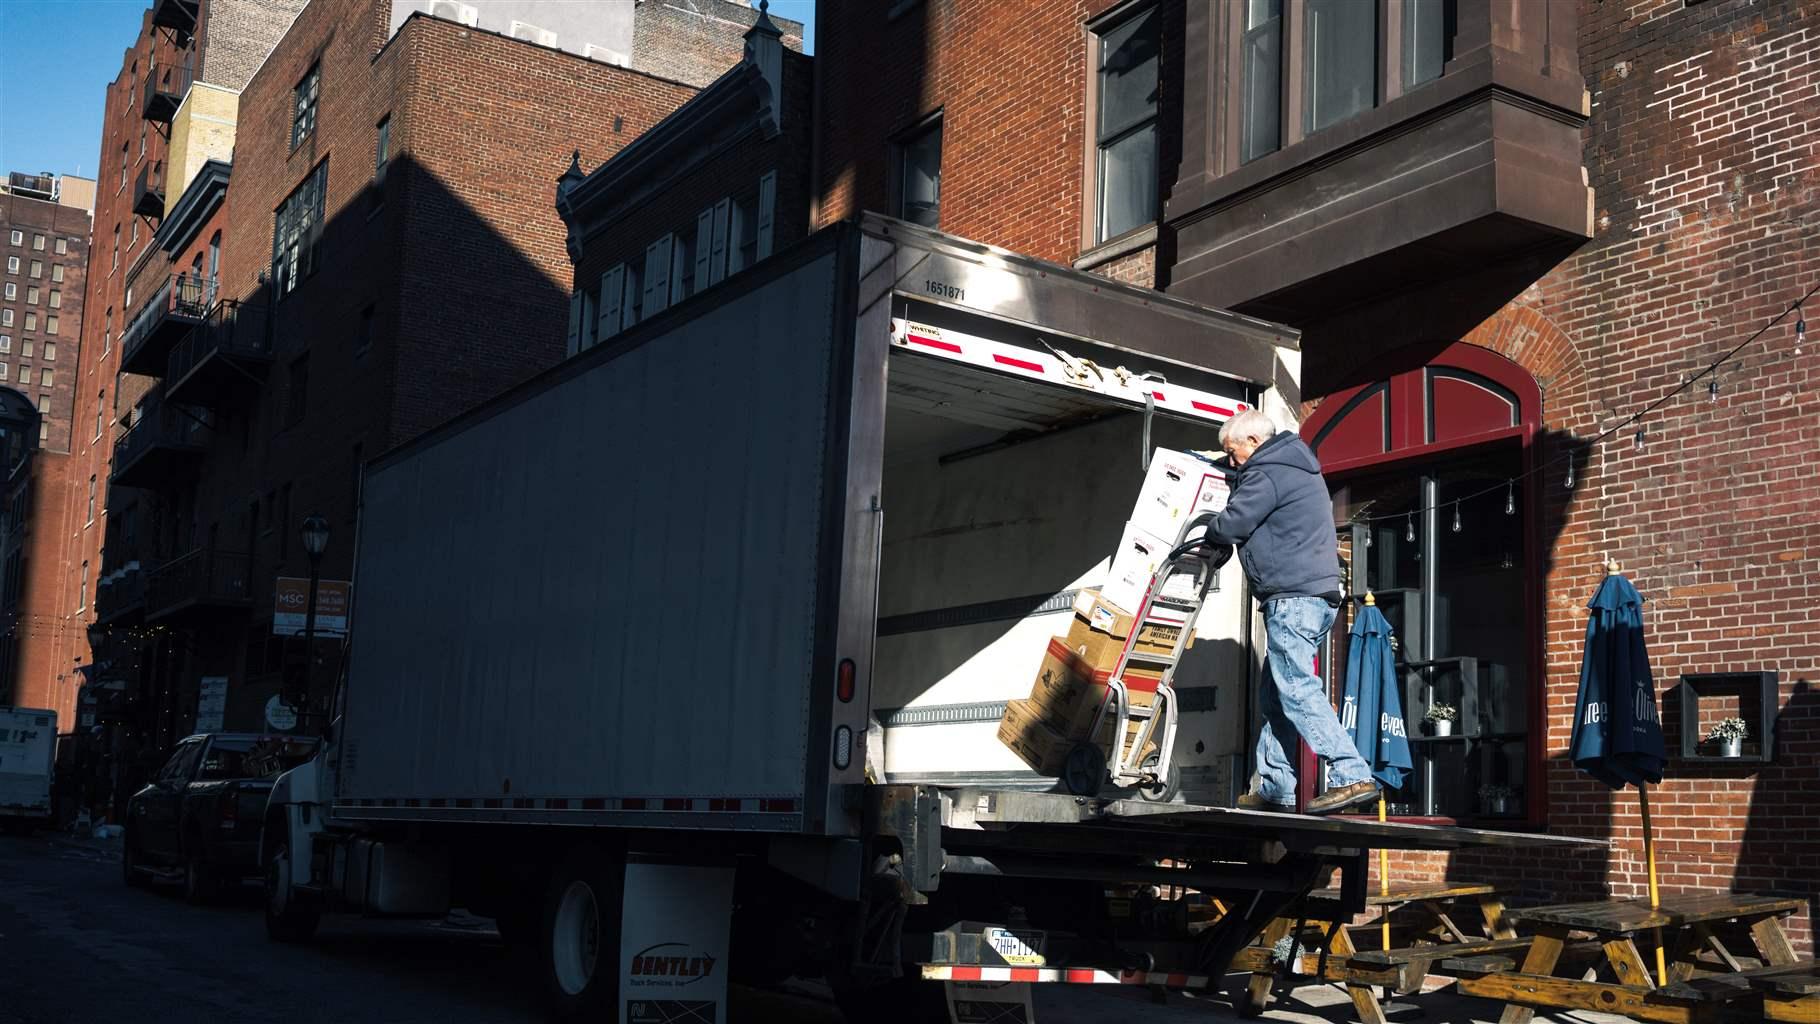 A man is unloading supplies at a loading dock of a building.